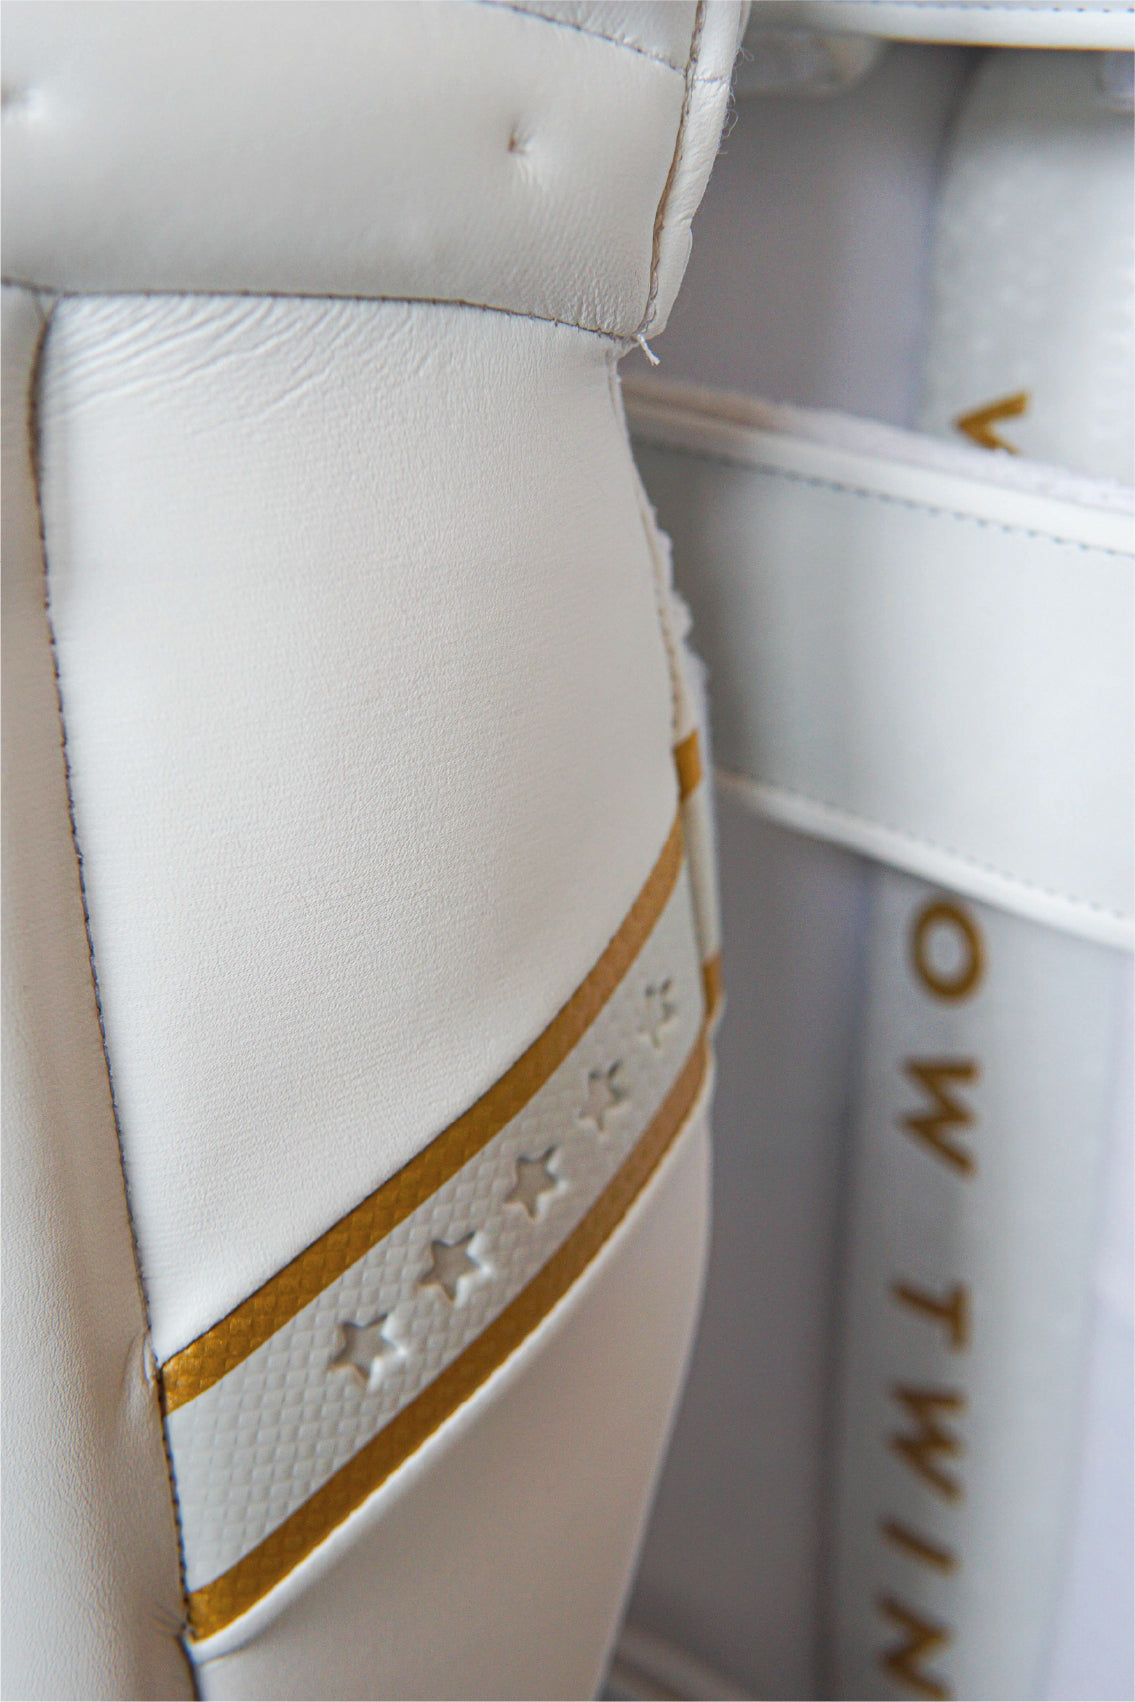 We finished the pads with Gold accented embossed Willow Twin brand detailing